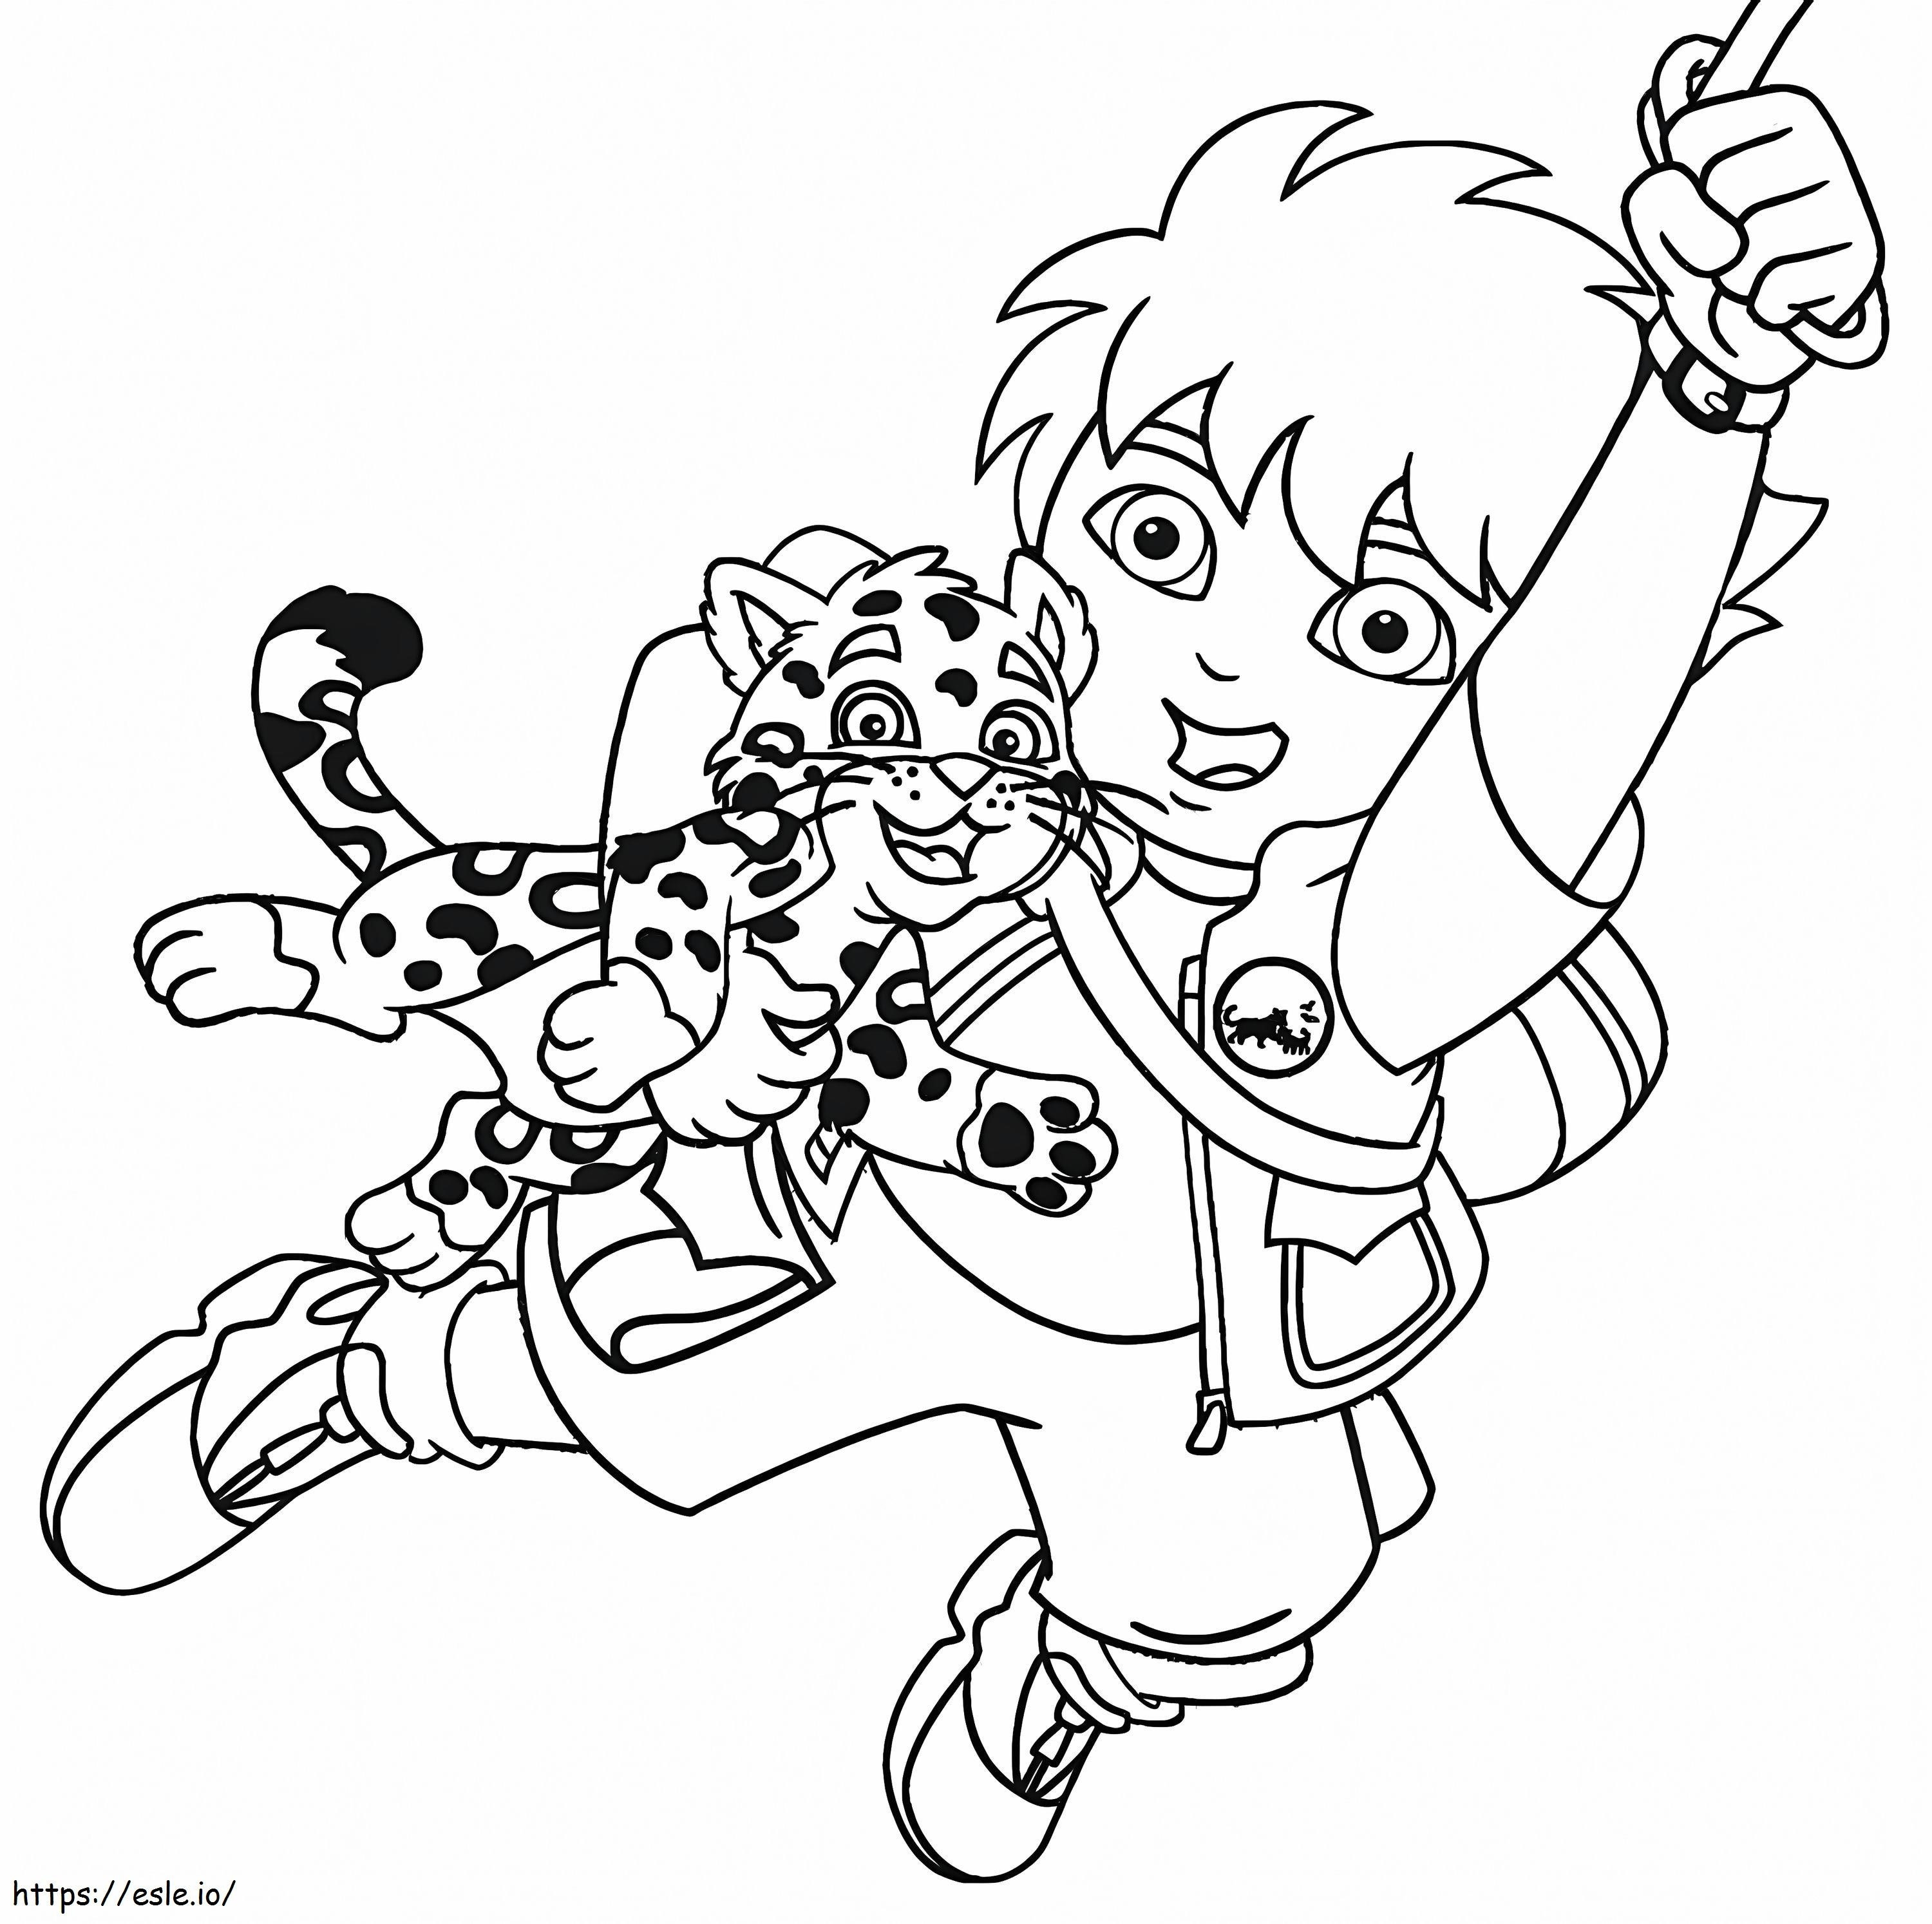 Diego And Jaguar Fun coloring page